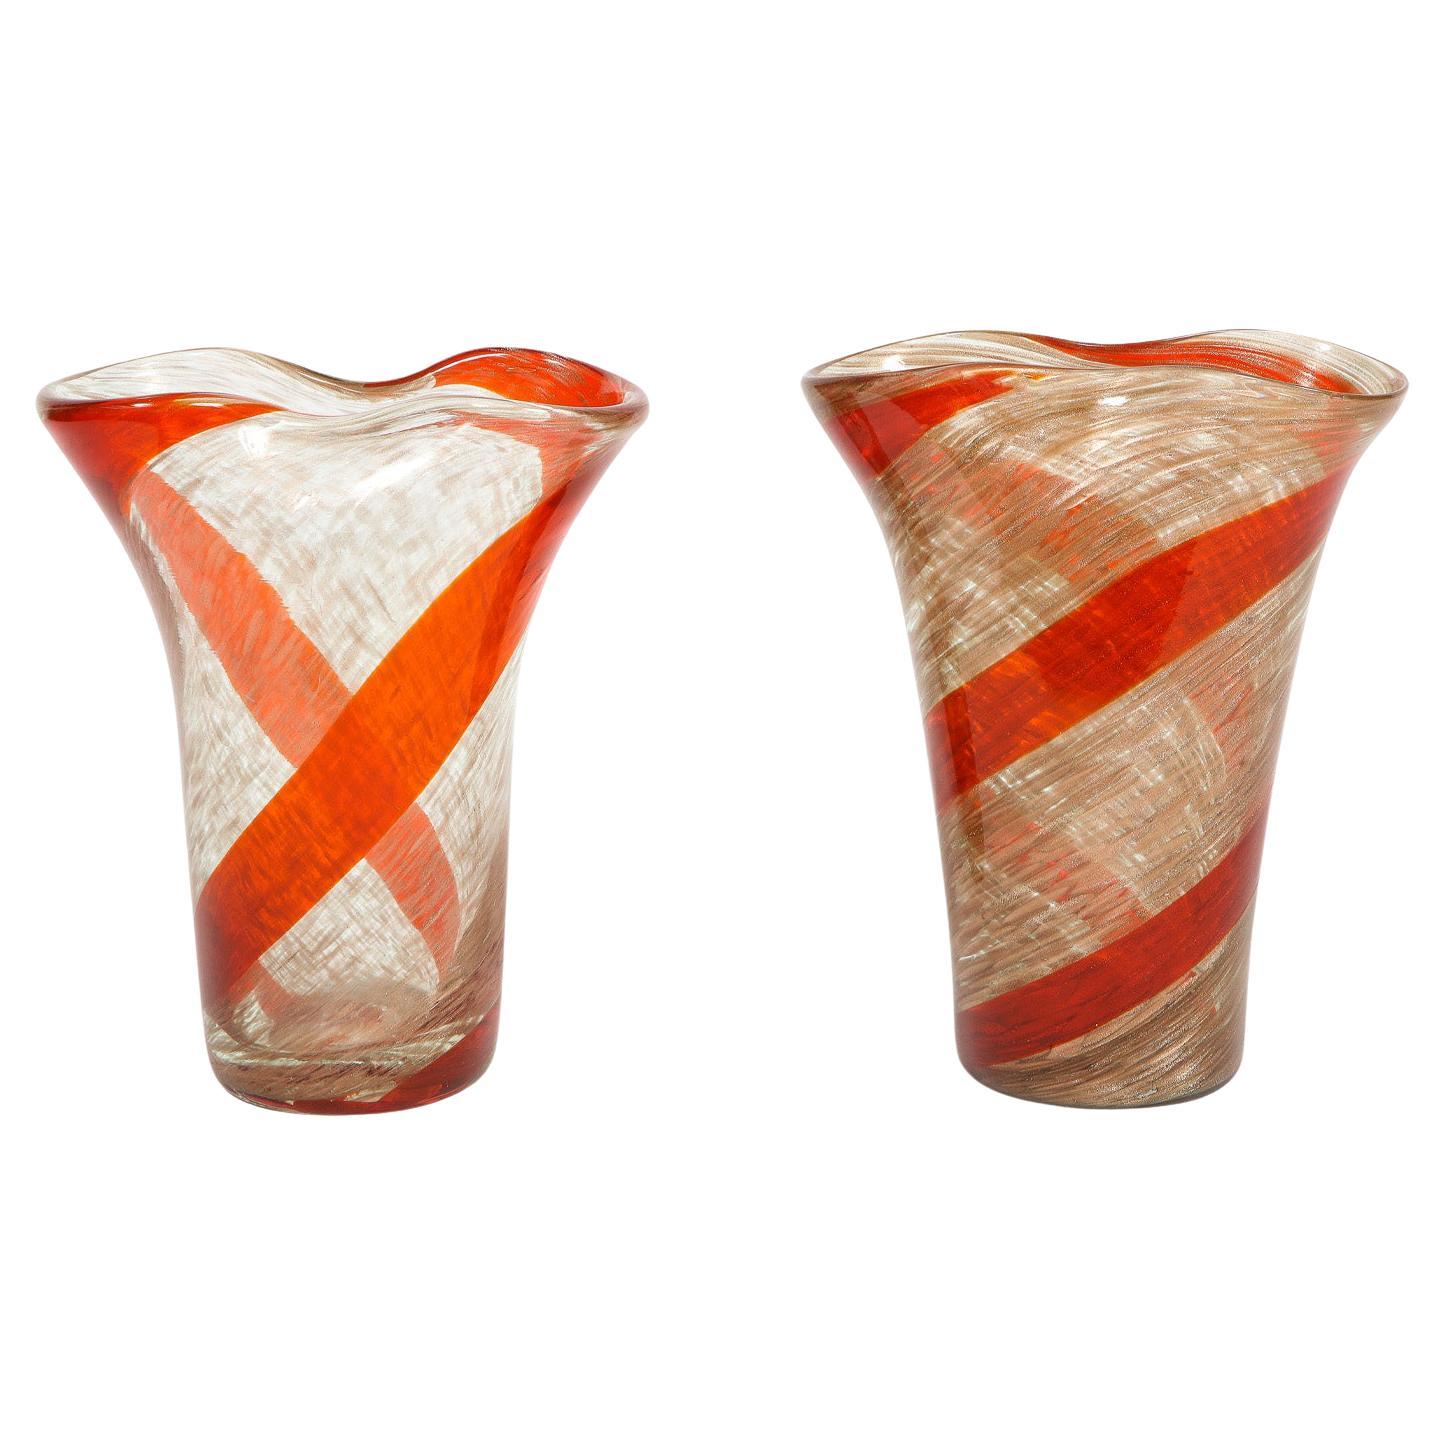 Fratelli Toso Pair of Pinched-Top Glass Vases with Red Spiral, 1950s For Sale